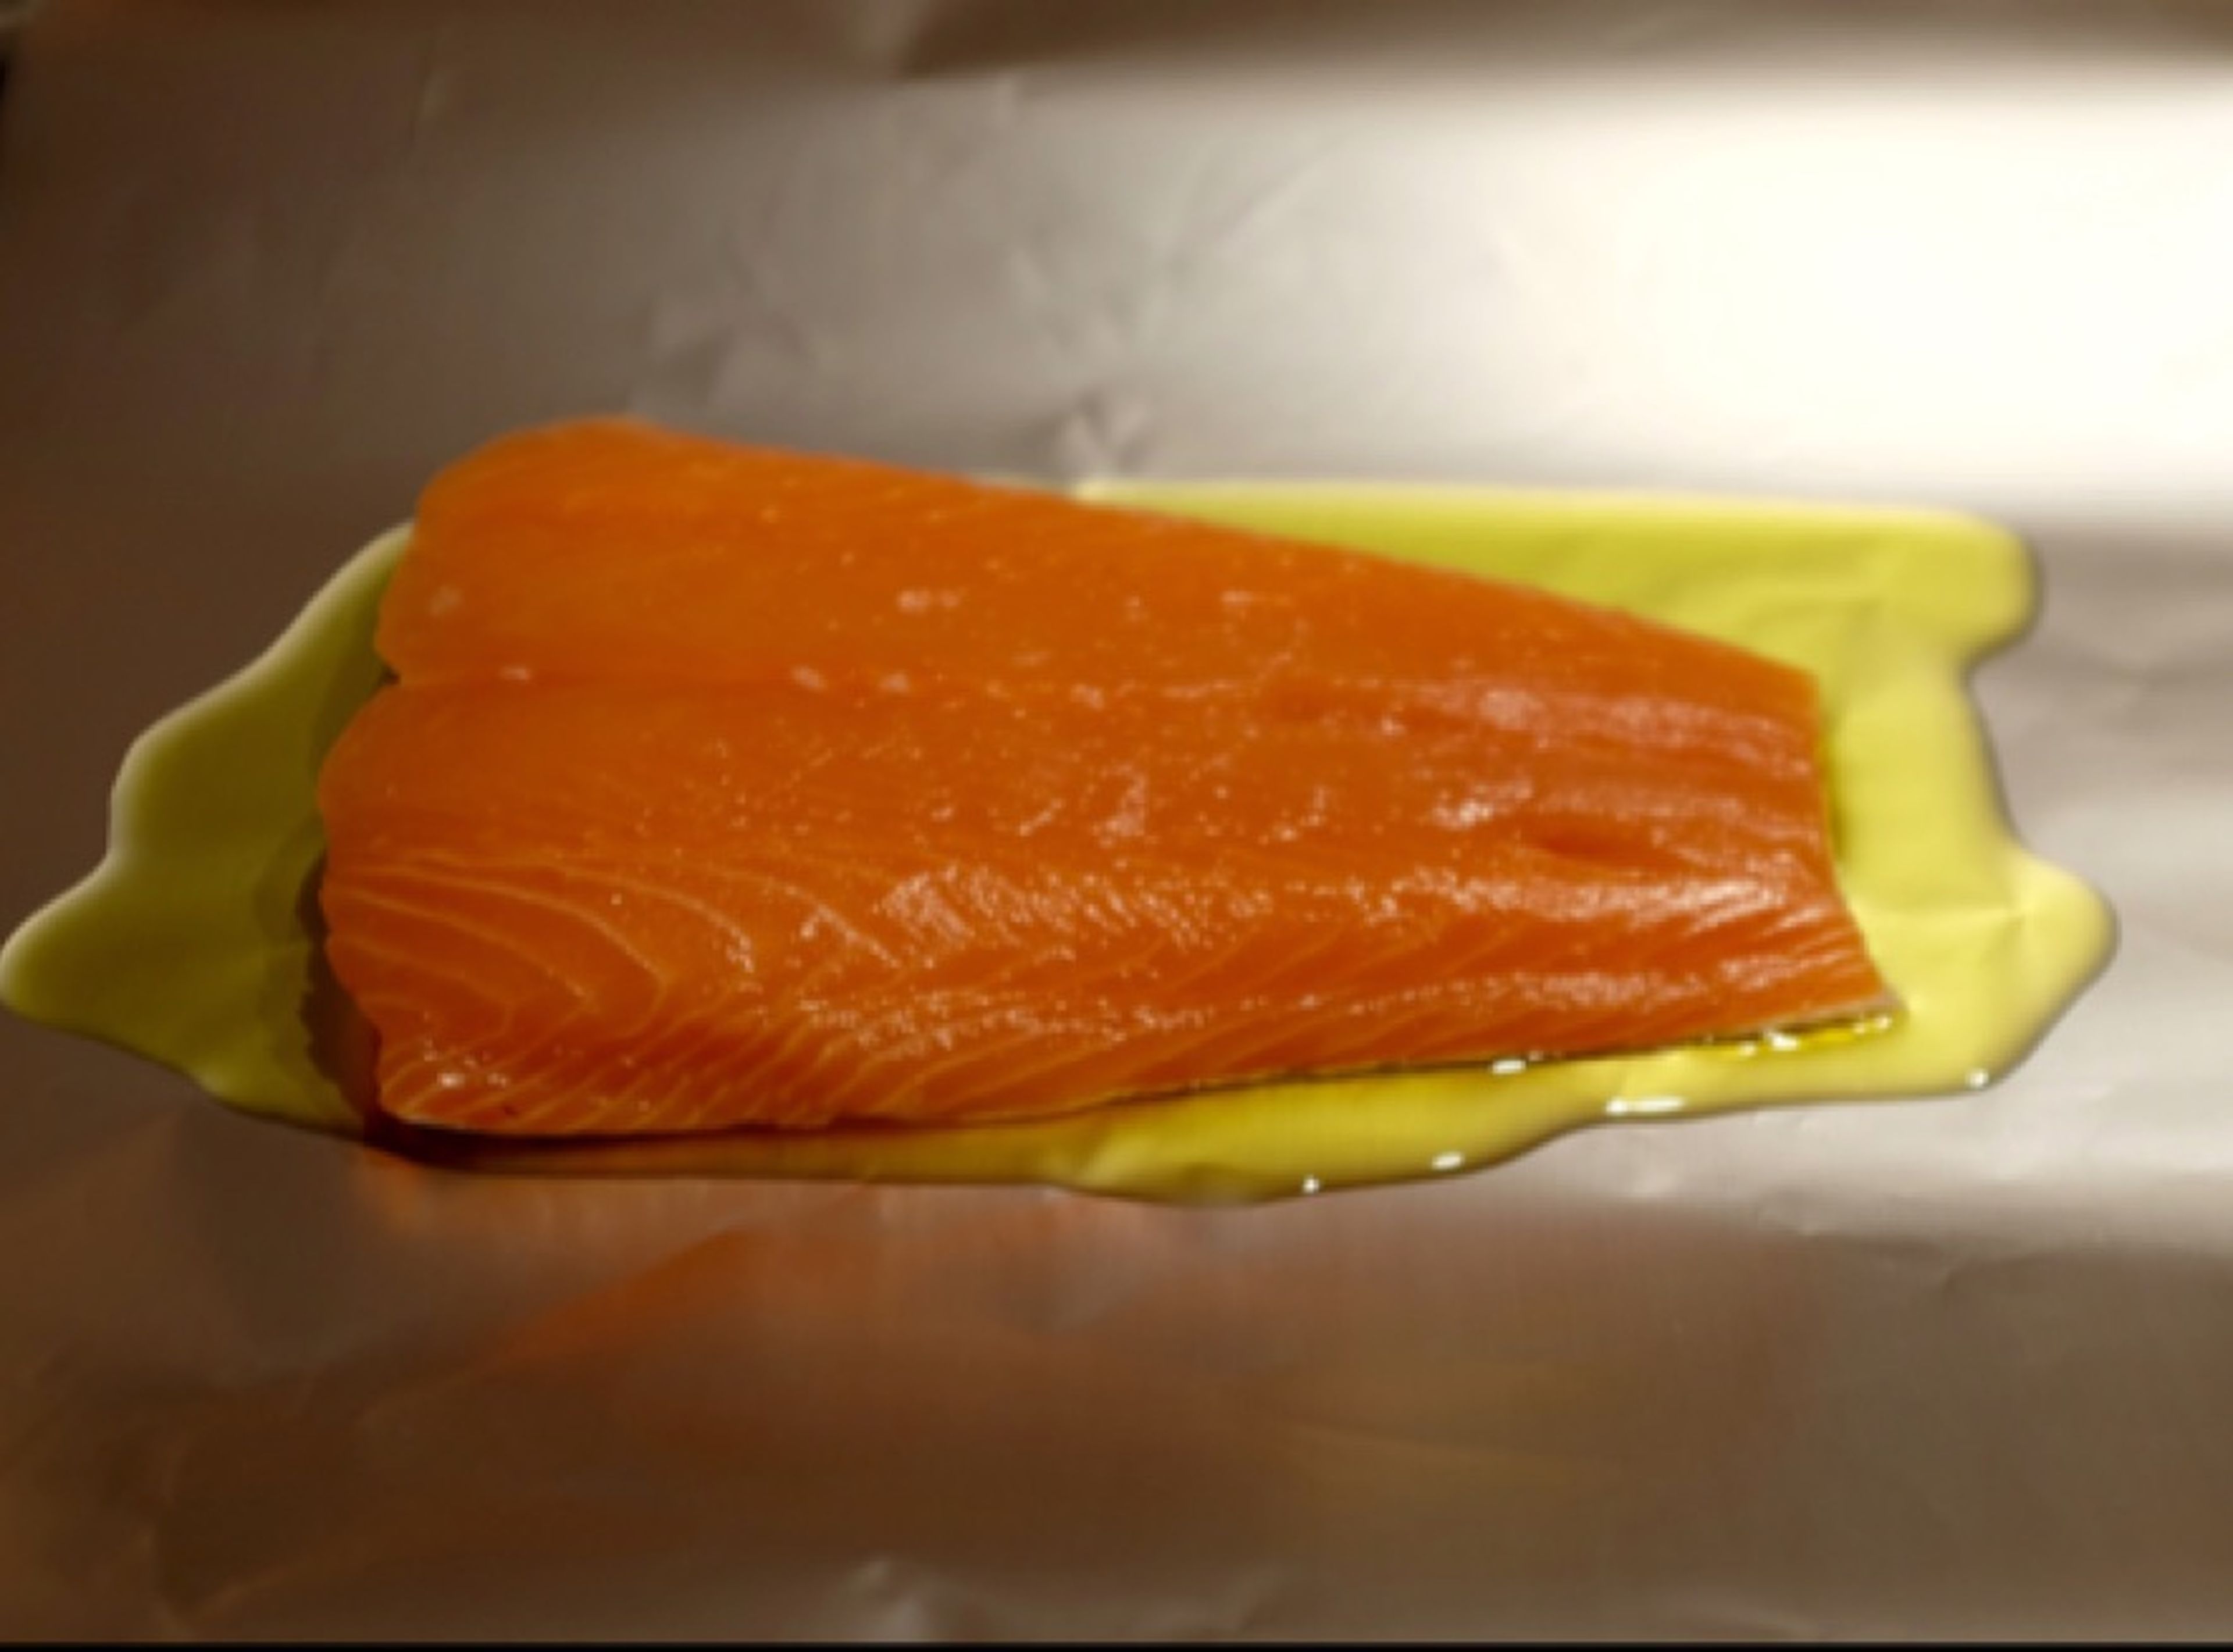 Preheat oven to 175°C/350°F. Line a baking sheet with one sheet of aluminum foil, drizzle the sheet with olive oil, and place salmon fillets on top.